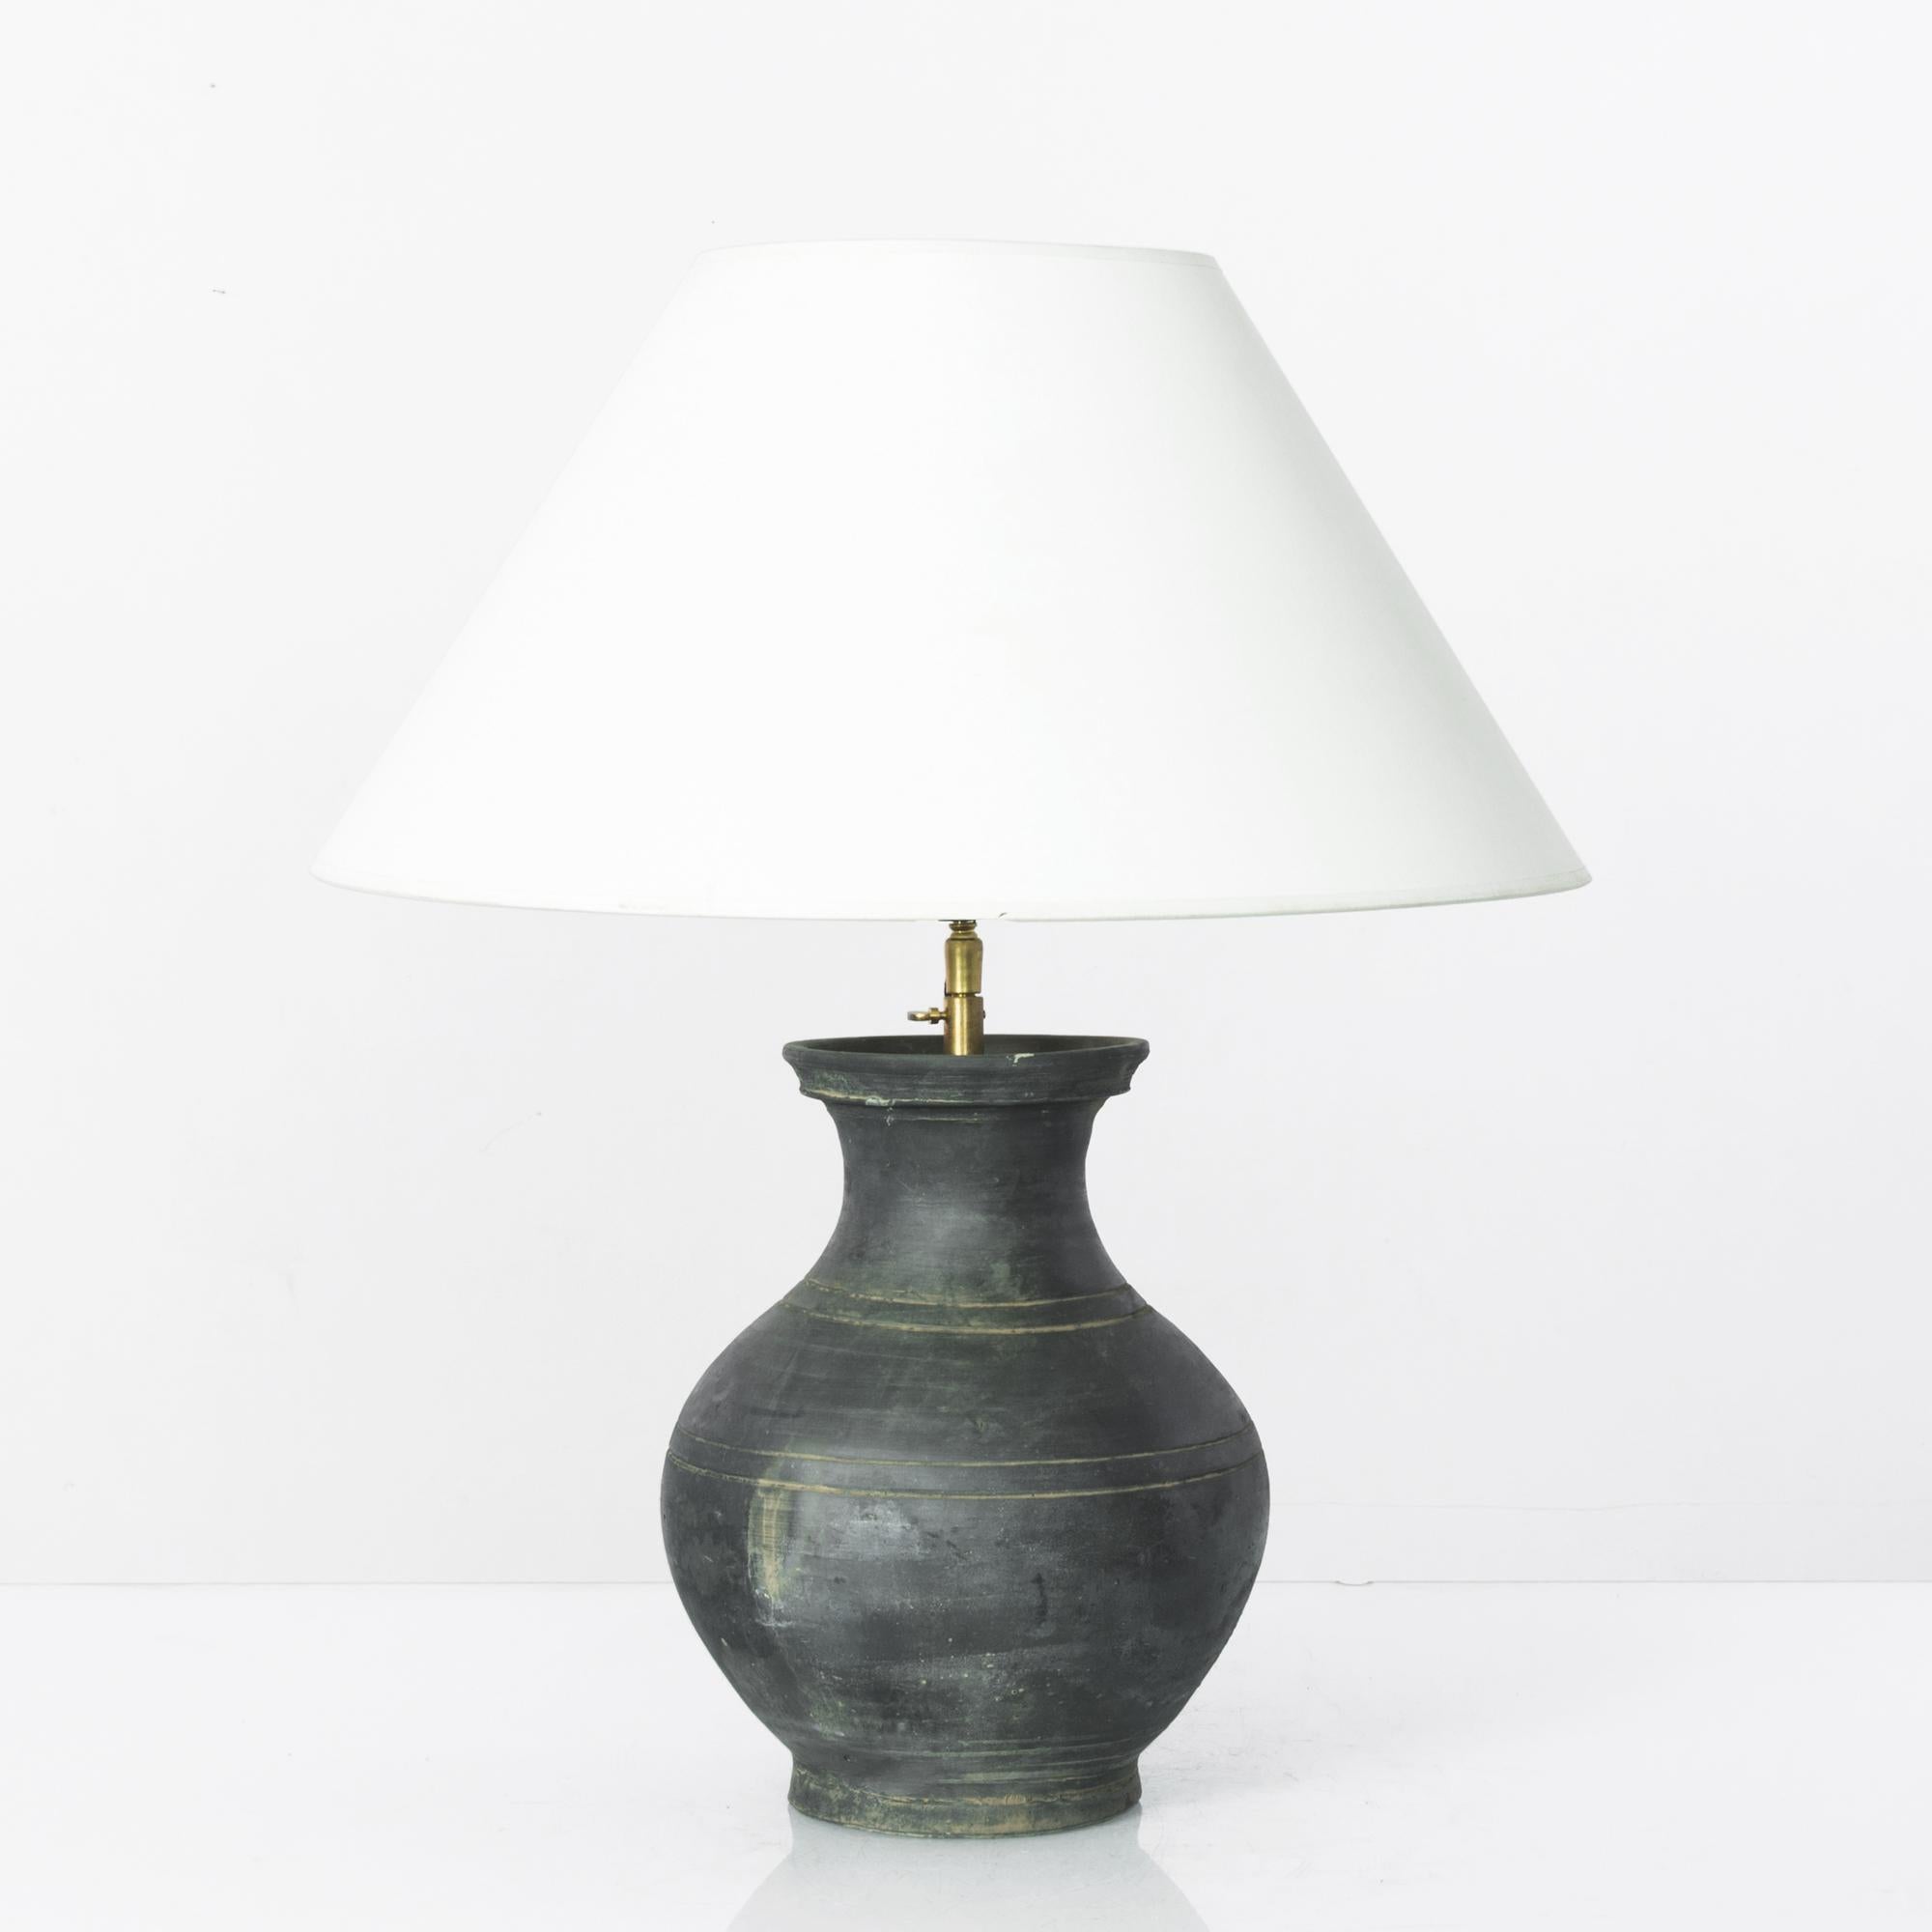 This finely crafted vintage Chinese vase has been fitted with an adjustable brass fixture and E26 lighting socket. Polished brass meets the textural carved and black glazed surface for an uncompromising contrast. Textured glazes, attractive colors